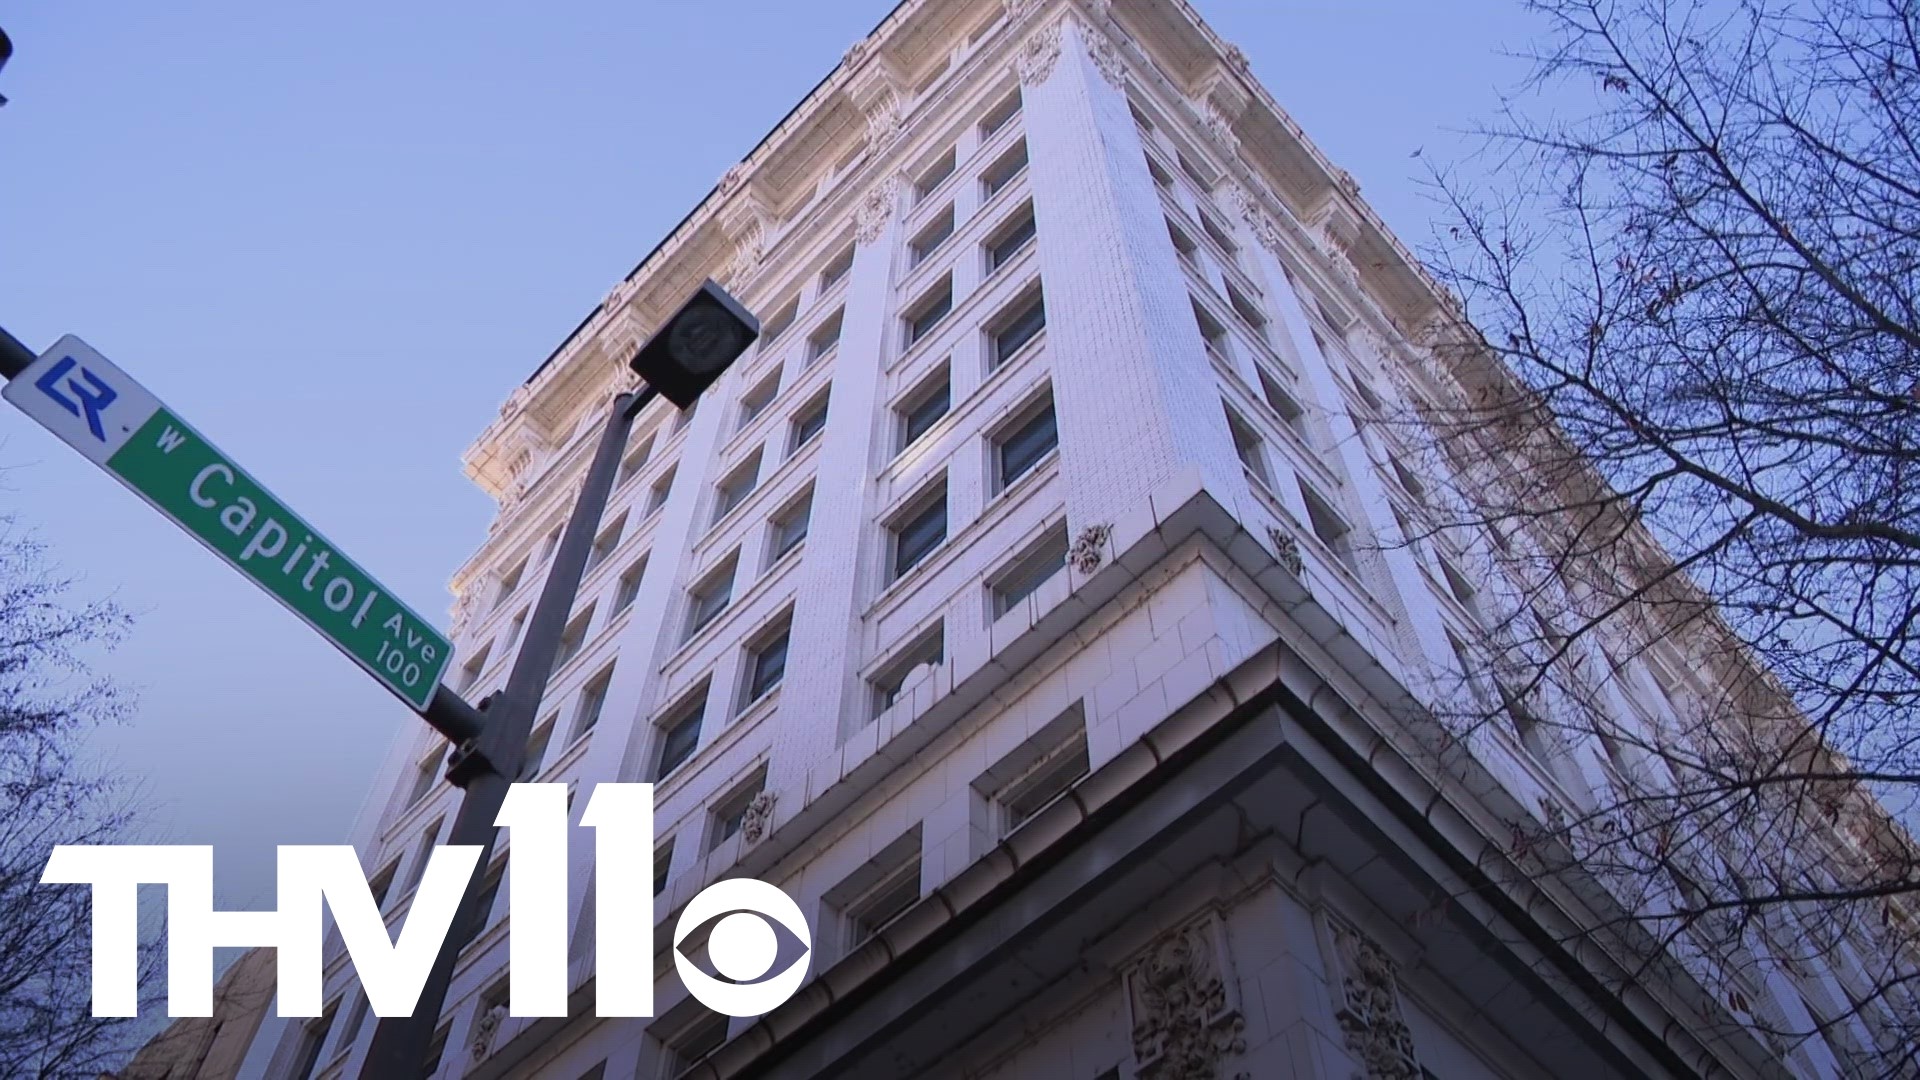 The Boyle Building has been vacant for years, but a significant facelift will soon change that. Here’s a look inside the historic building and the changes in store.